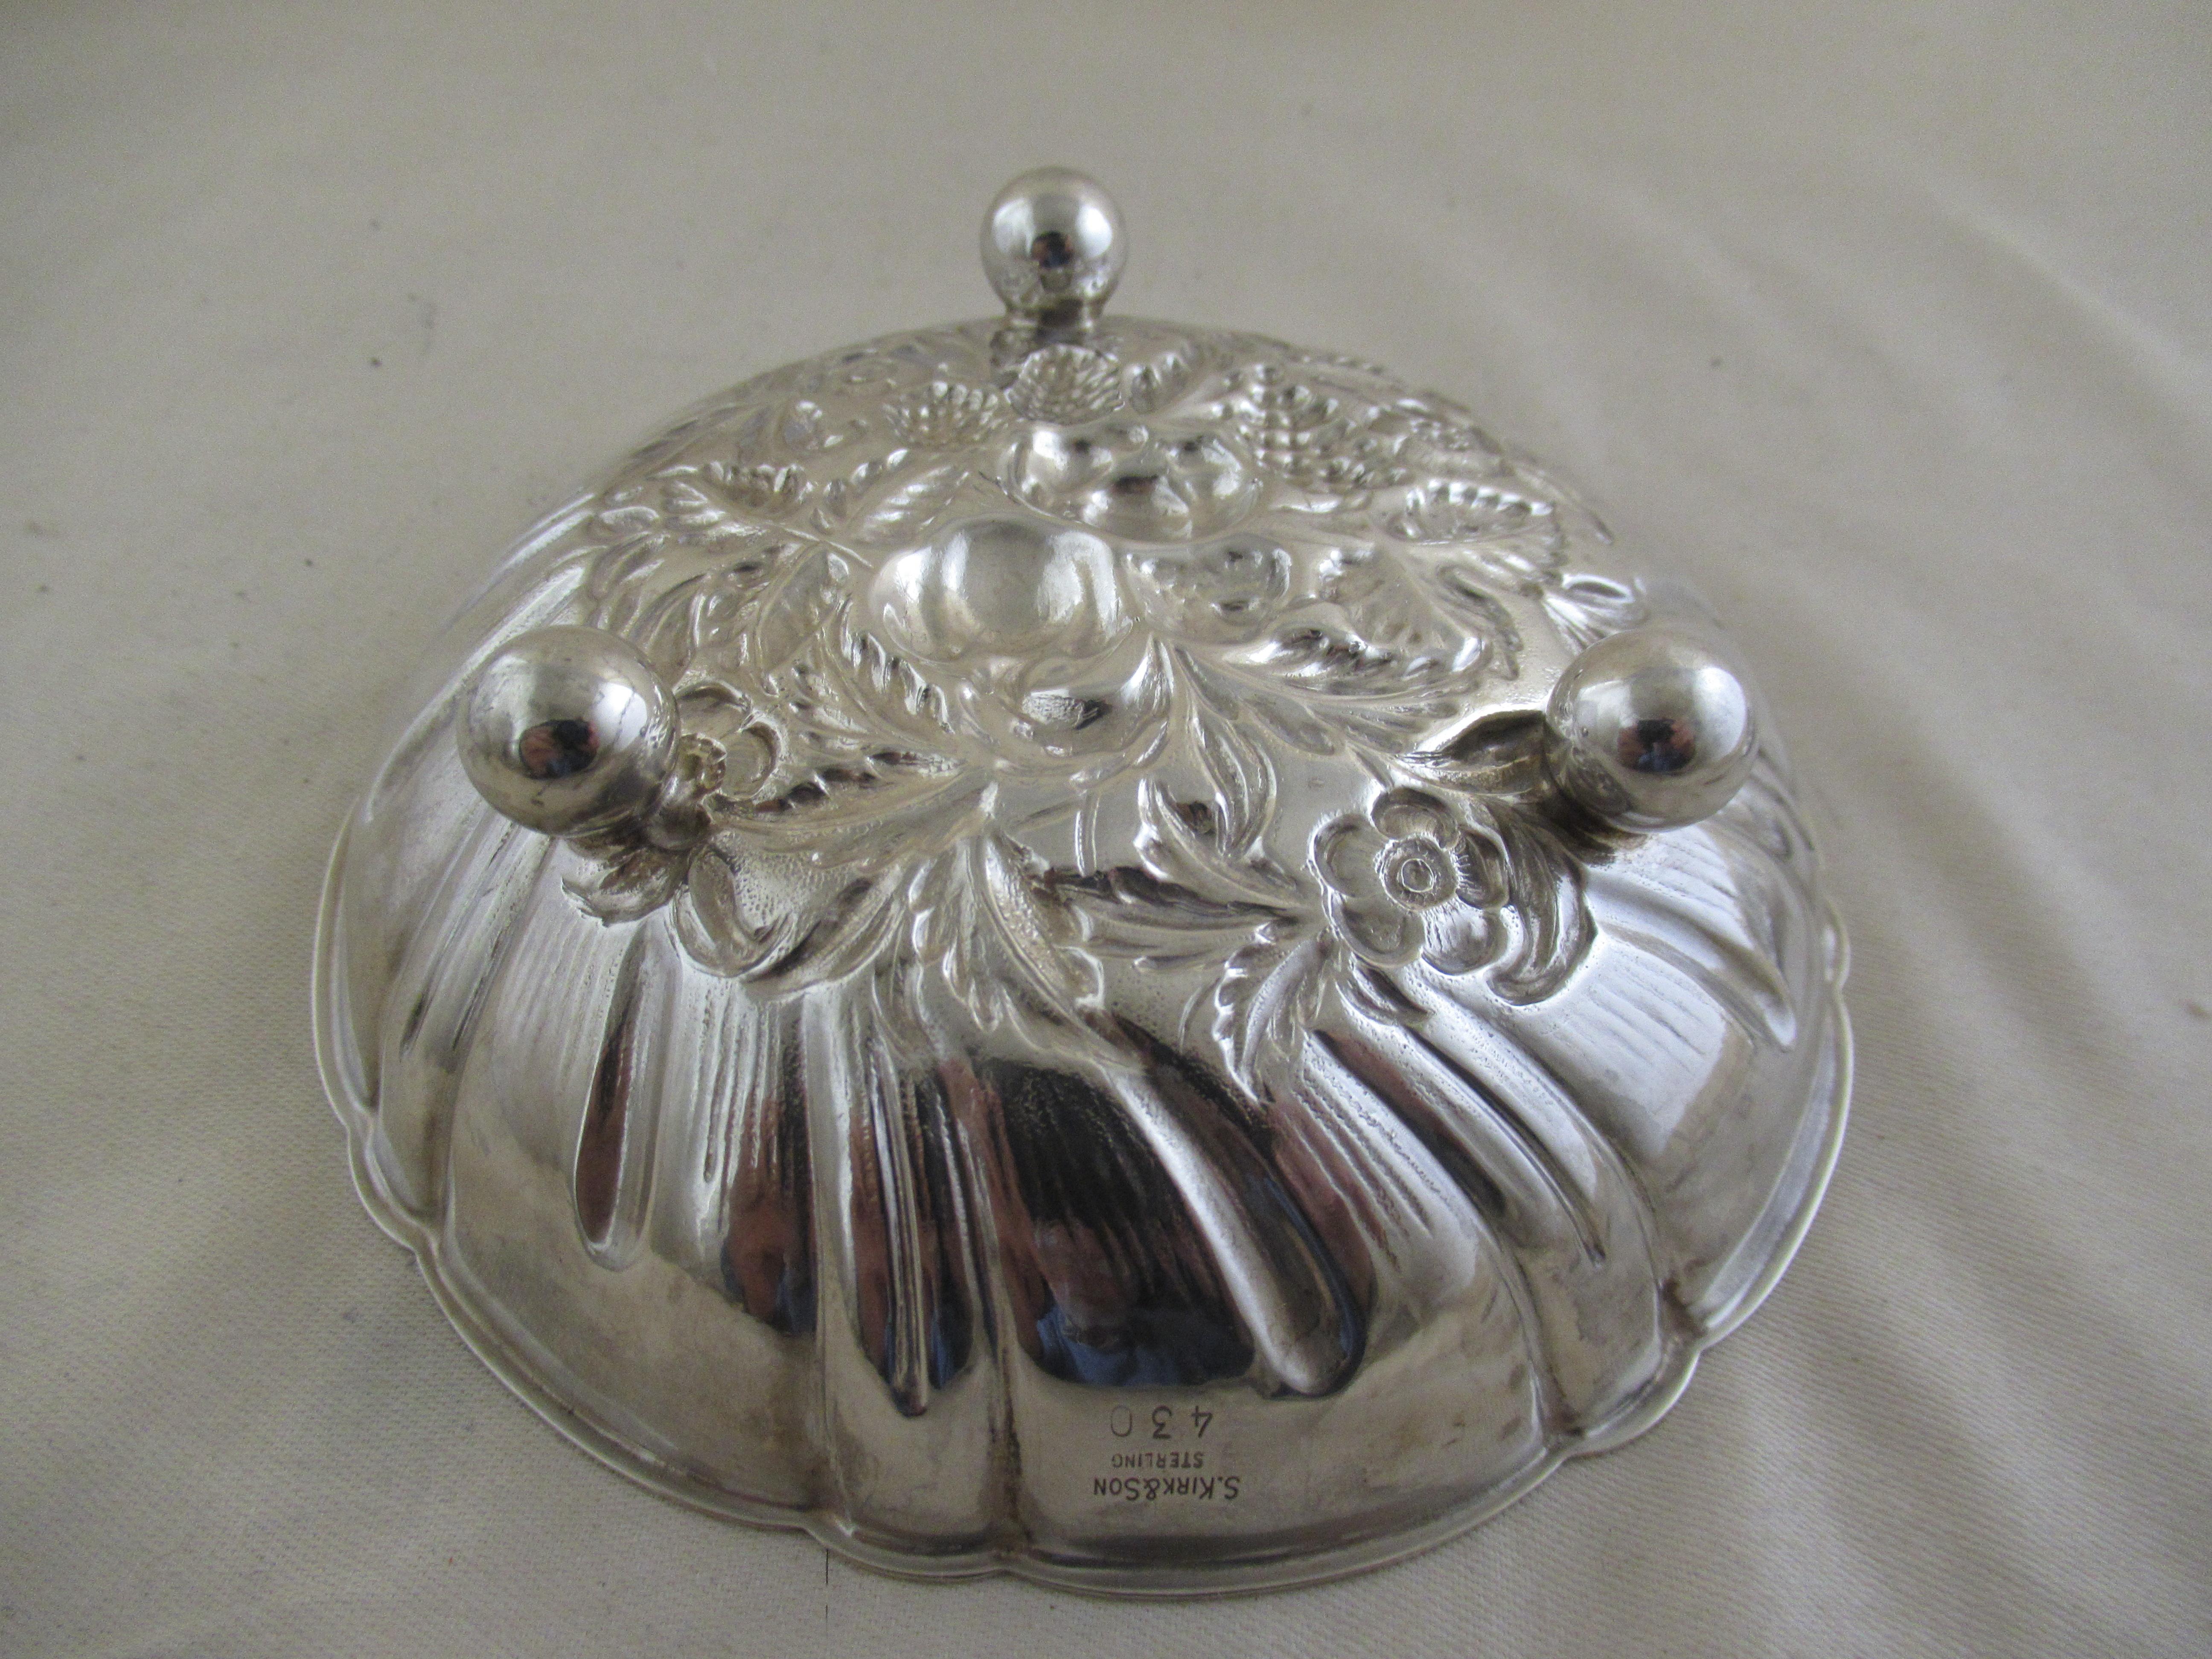 Hand-Crafted Solid Sterling Silver Conserve Dish & Spoon, Made by Kirk & Son, Maryland